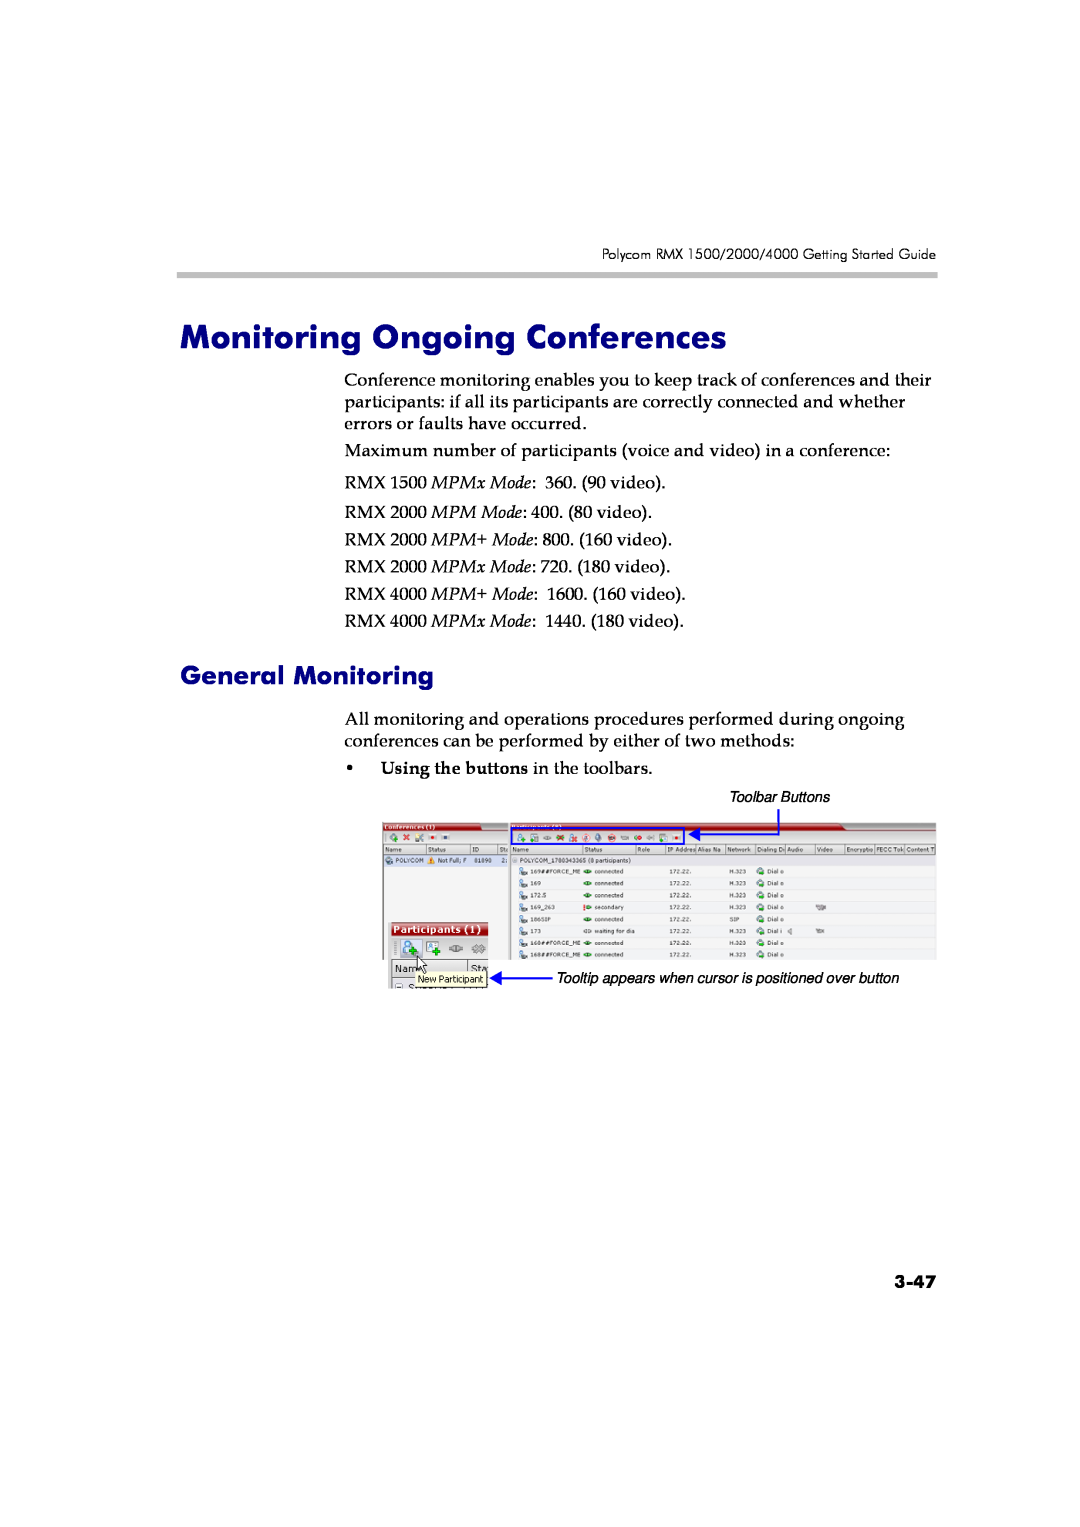 Polycom DOC2560A manual Monitoring Ongoing Conferences, General Monitoring, Using the buttons in the toolbars, 3-47 